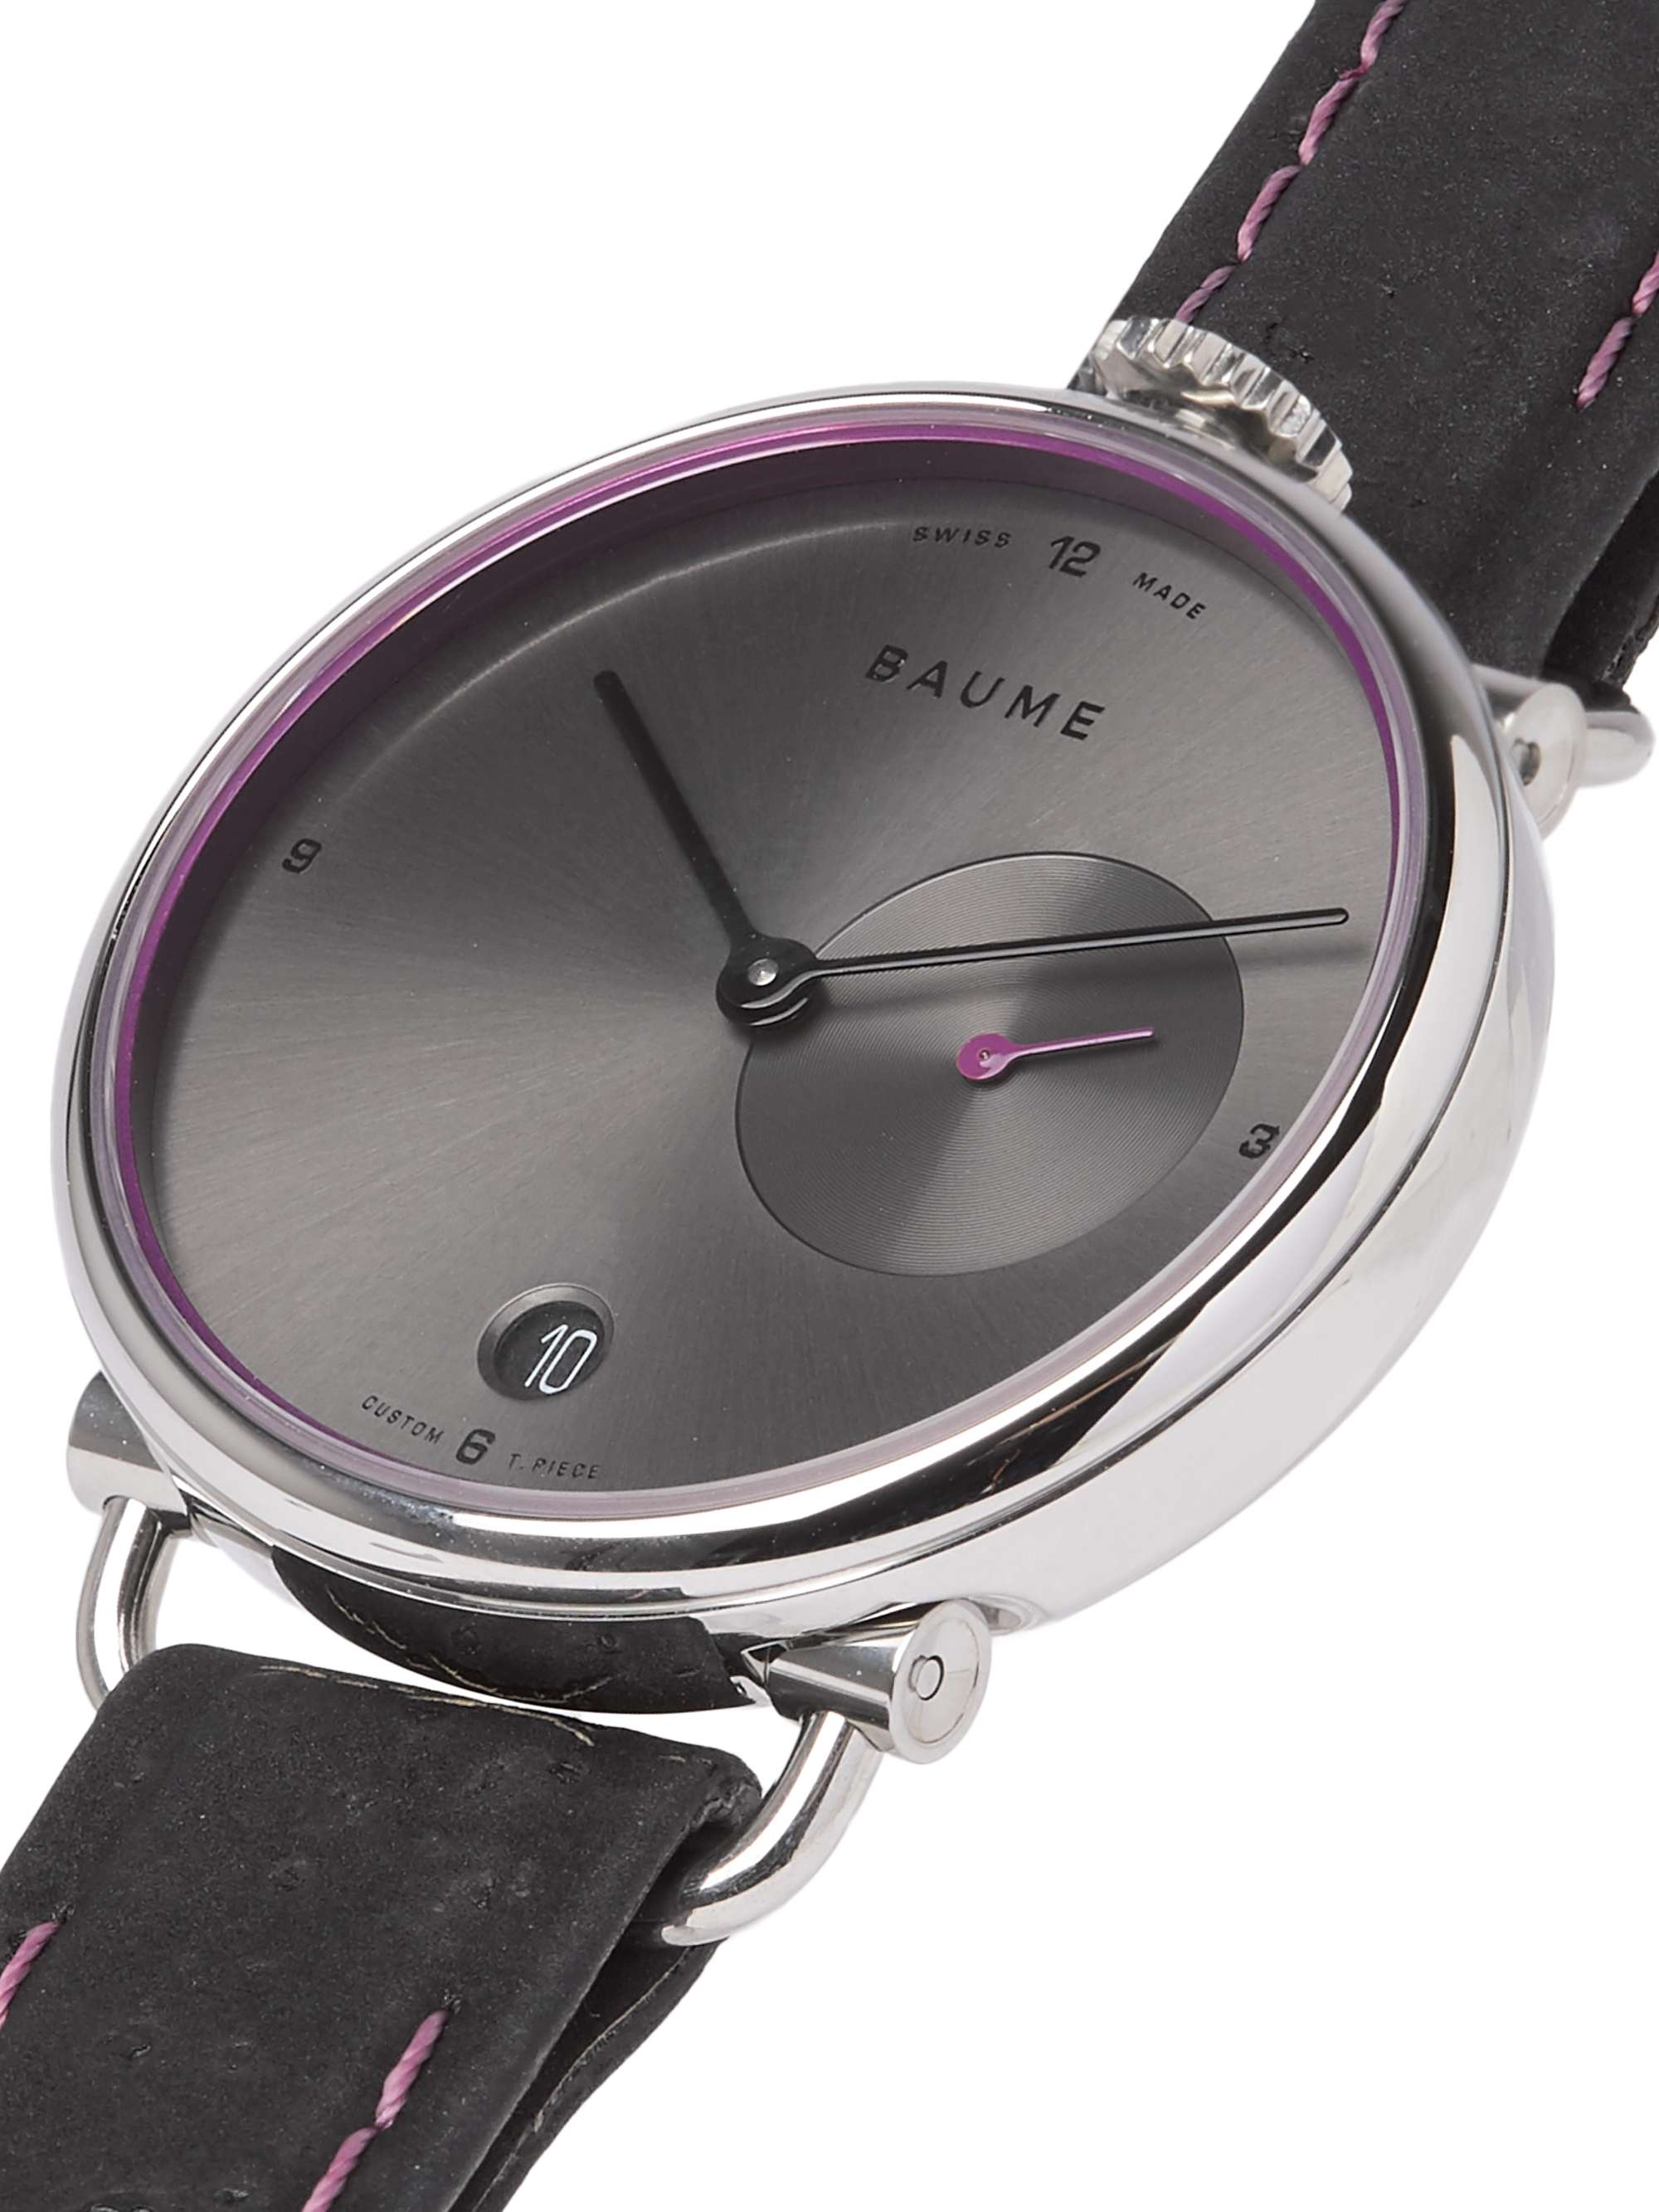 BAUME 35mm Stainless Steel and Cork Watch, Ref. No. 10604